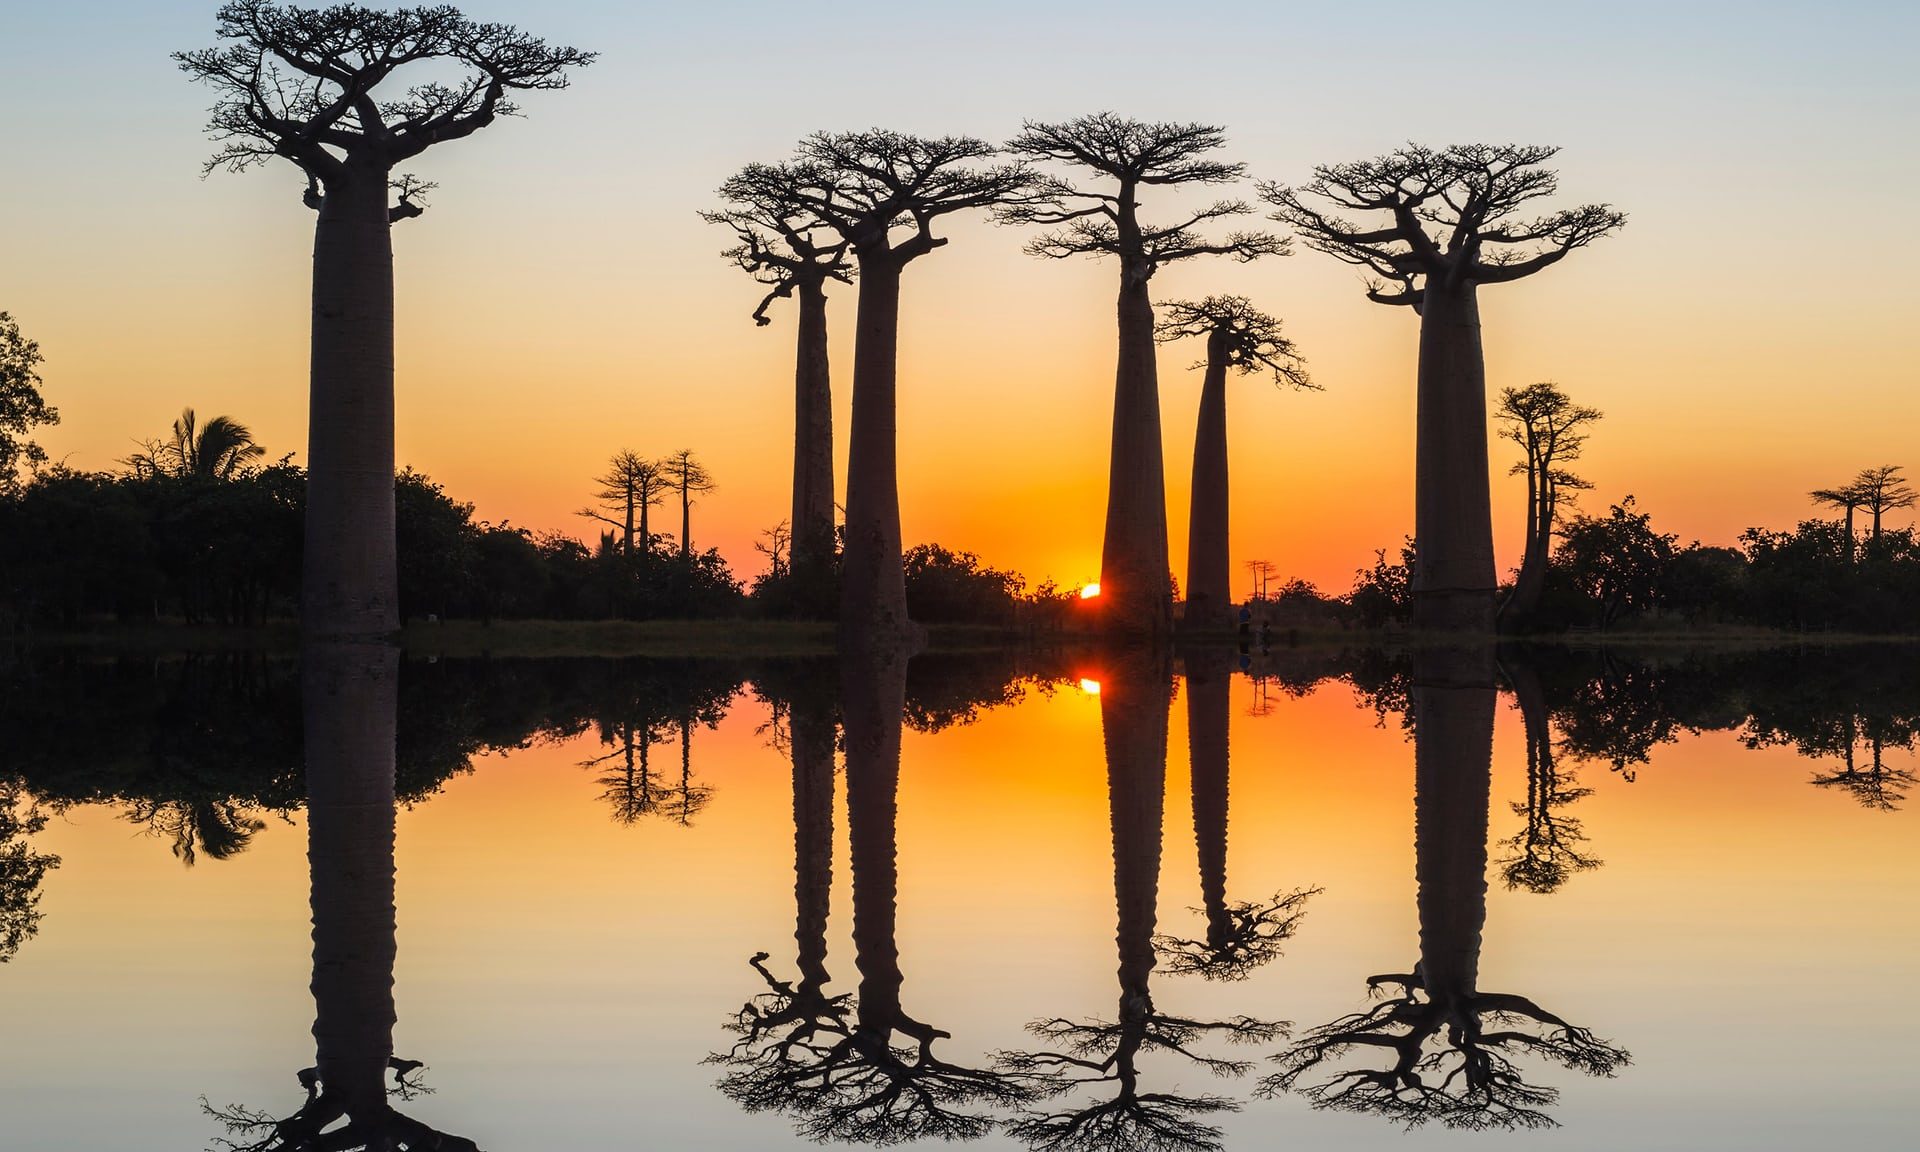 One baobab tree has been estimated to be 2,500 years old.